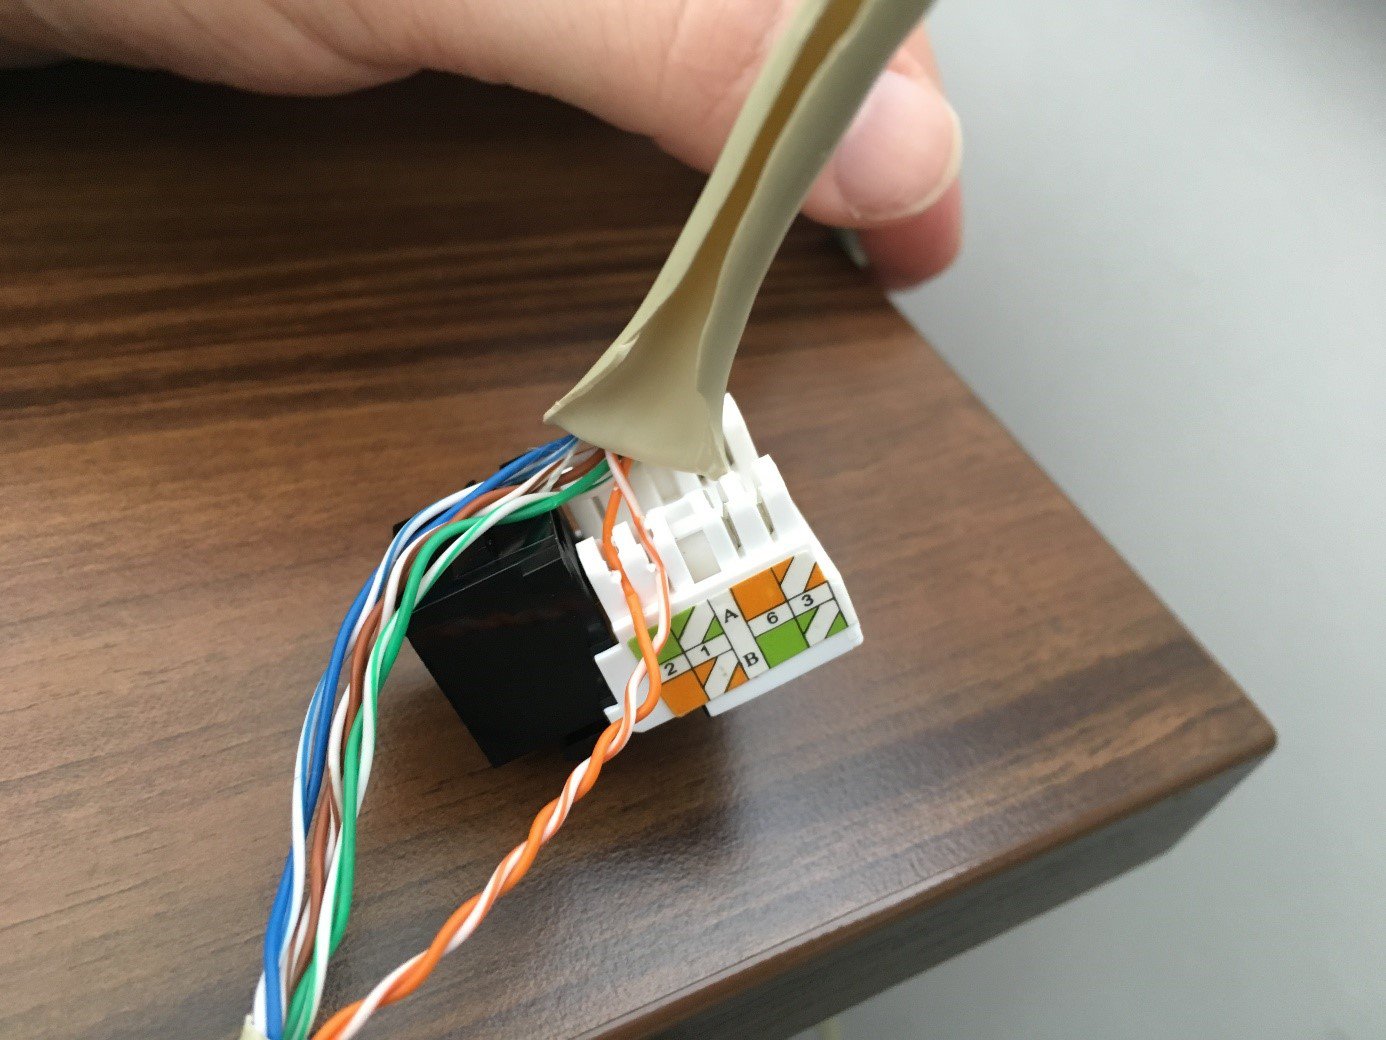 Connecting the data socket to the wires